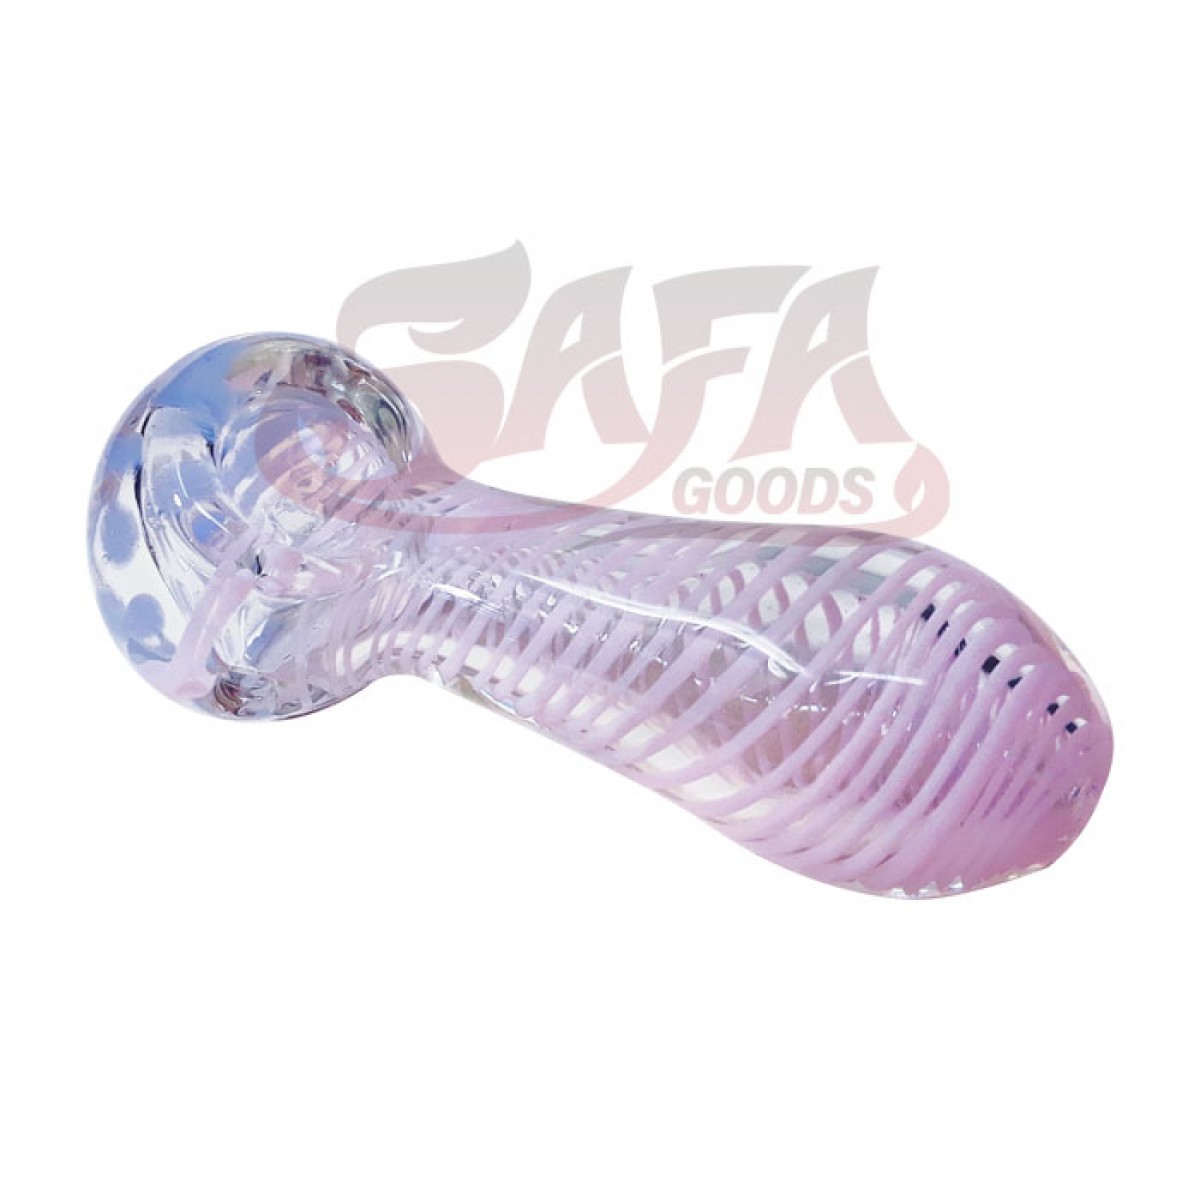 3.5 Inch Glass Hand Pipes - Spiral and Dots